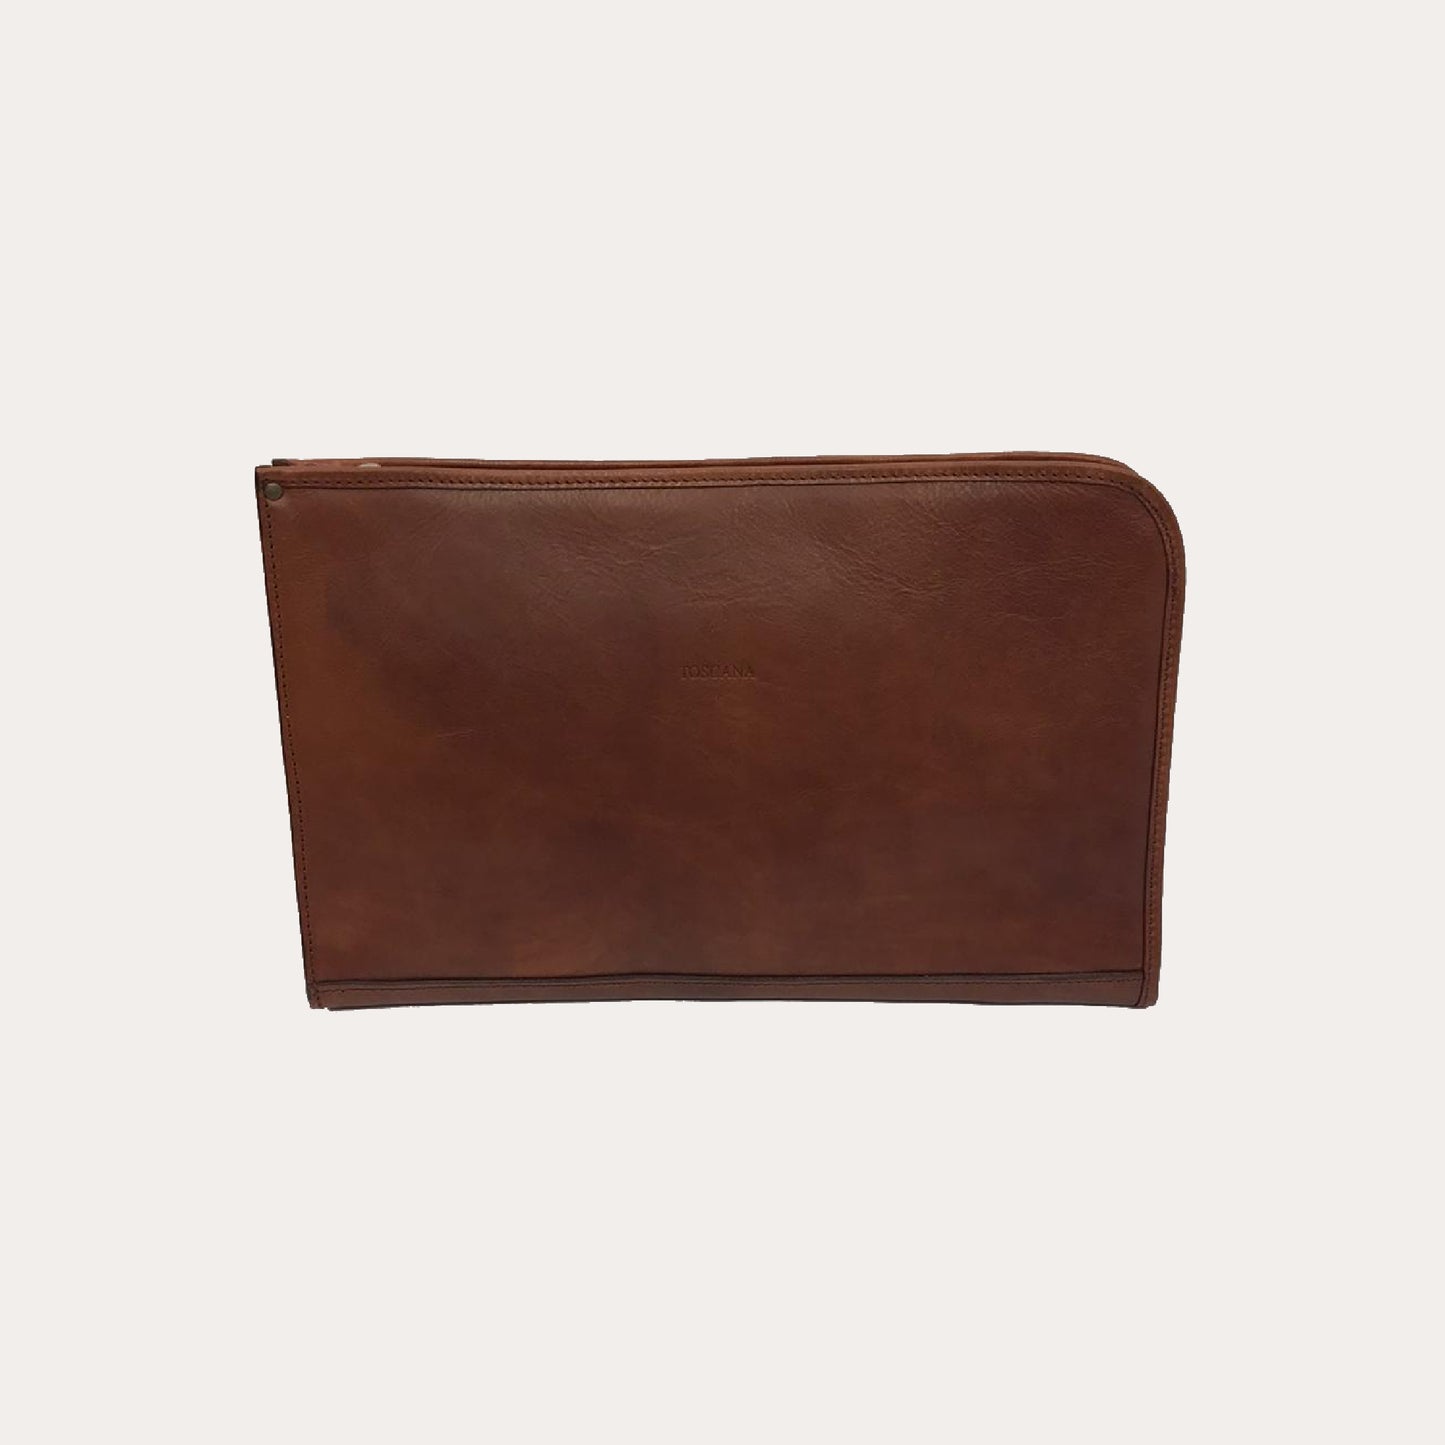 Tan Leather Document Holder